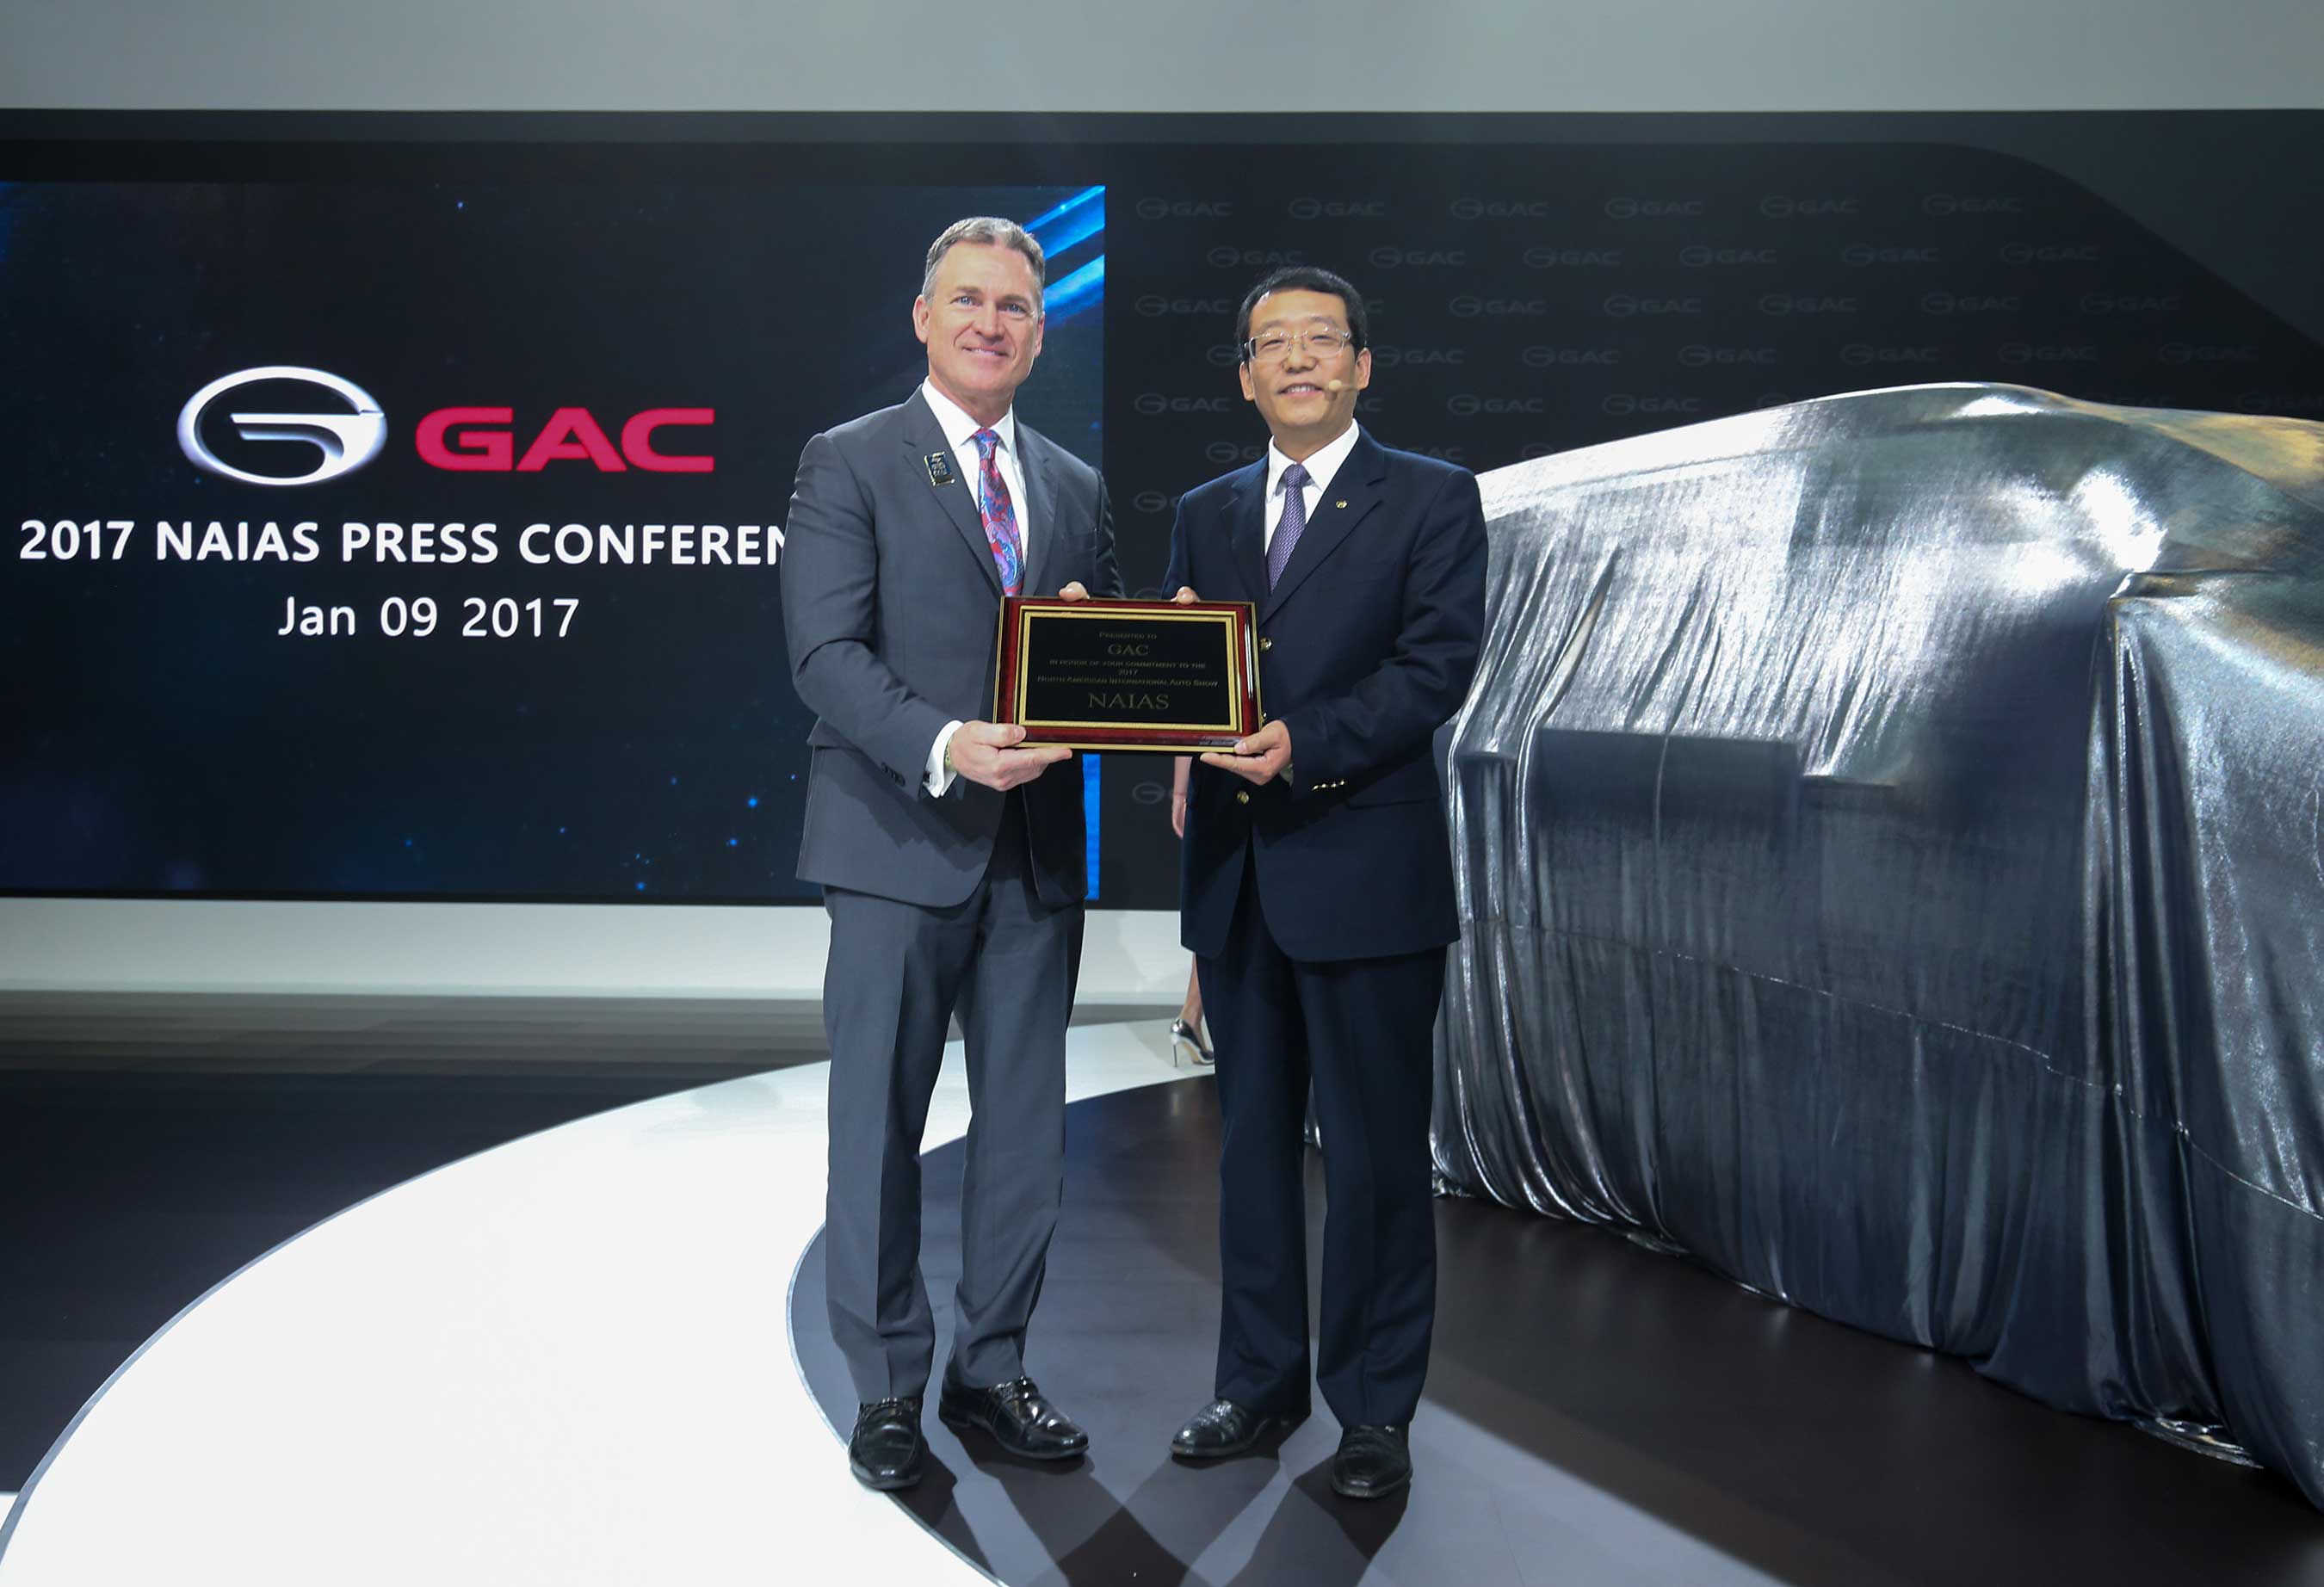 Rod Alberts, executive director of NAIAS, presented “In Honor of Commitment to the 2017 NAIAS” award to GAC Motor